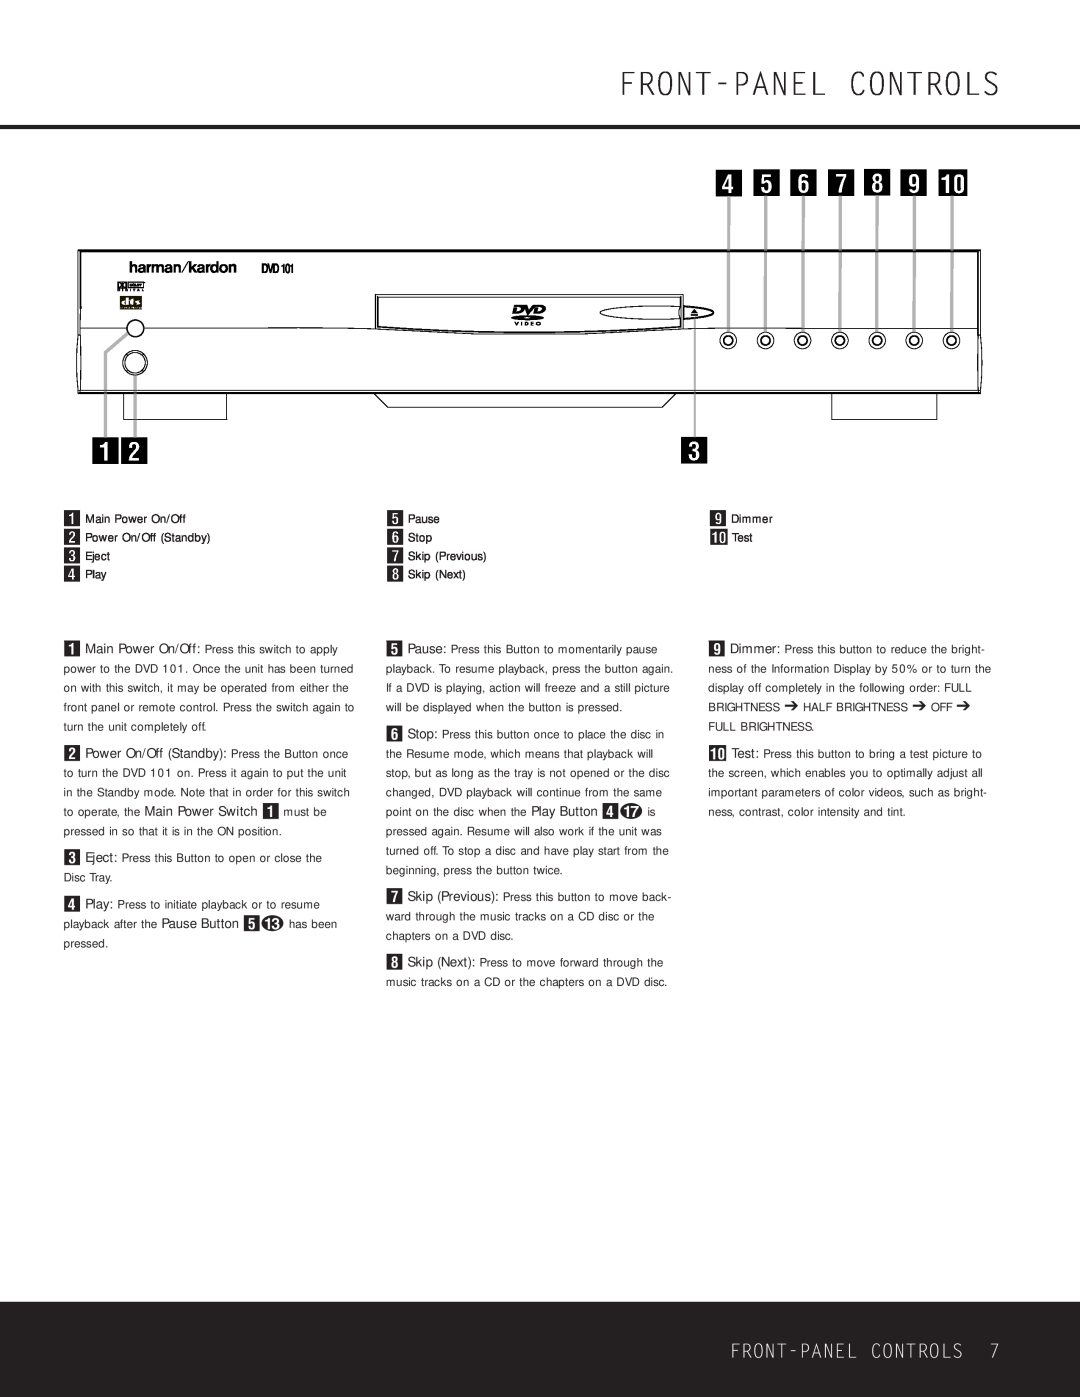 Harman-Kardon WLD8.810.119-1 Front-Panel Controls, Main Power On/Off 1 Power On/Off Standby 2 Eject 3 Play, Dimmer 9 Test 